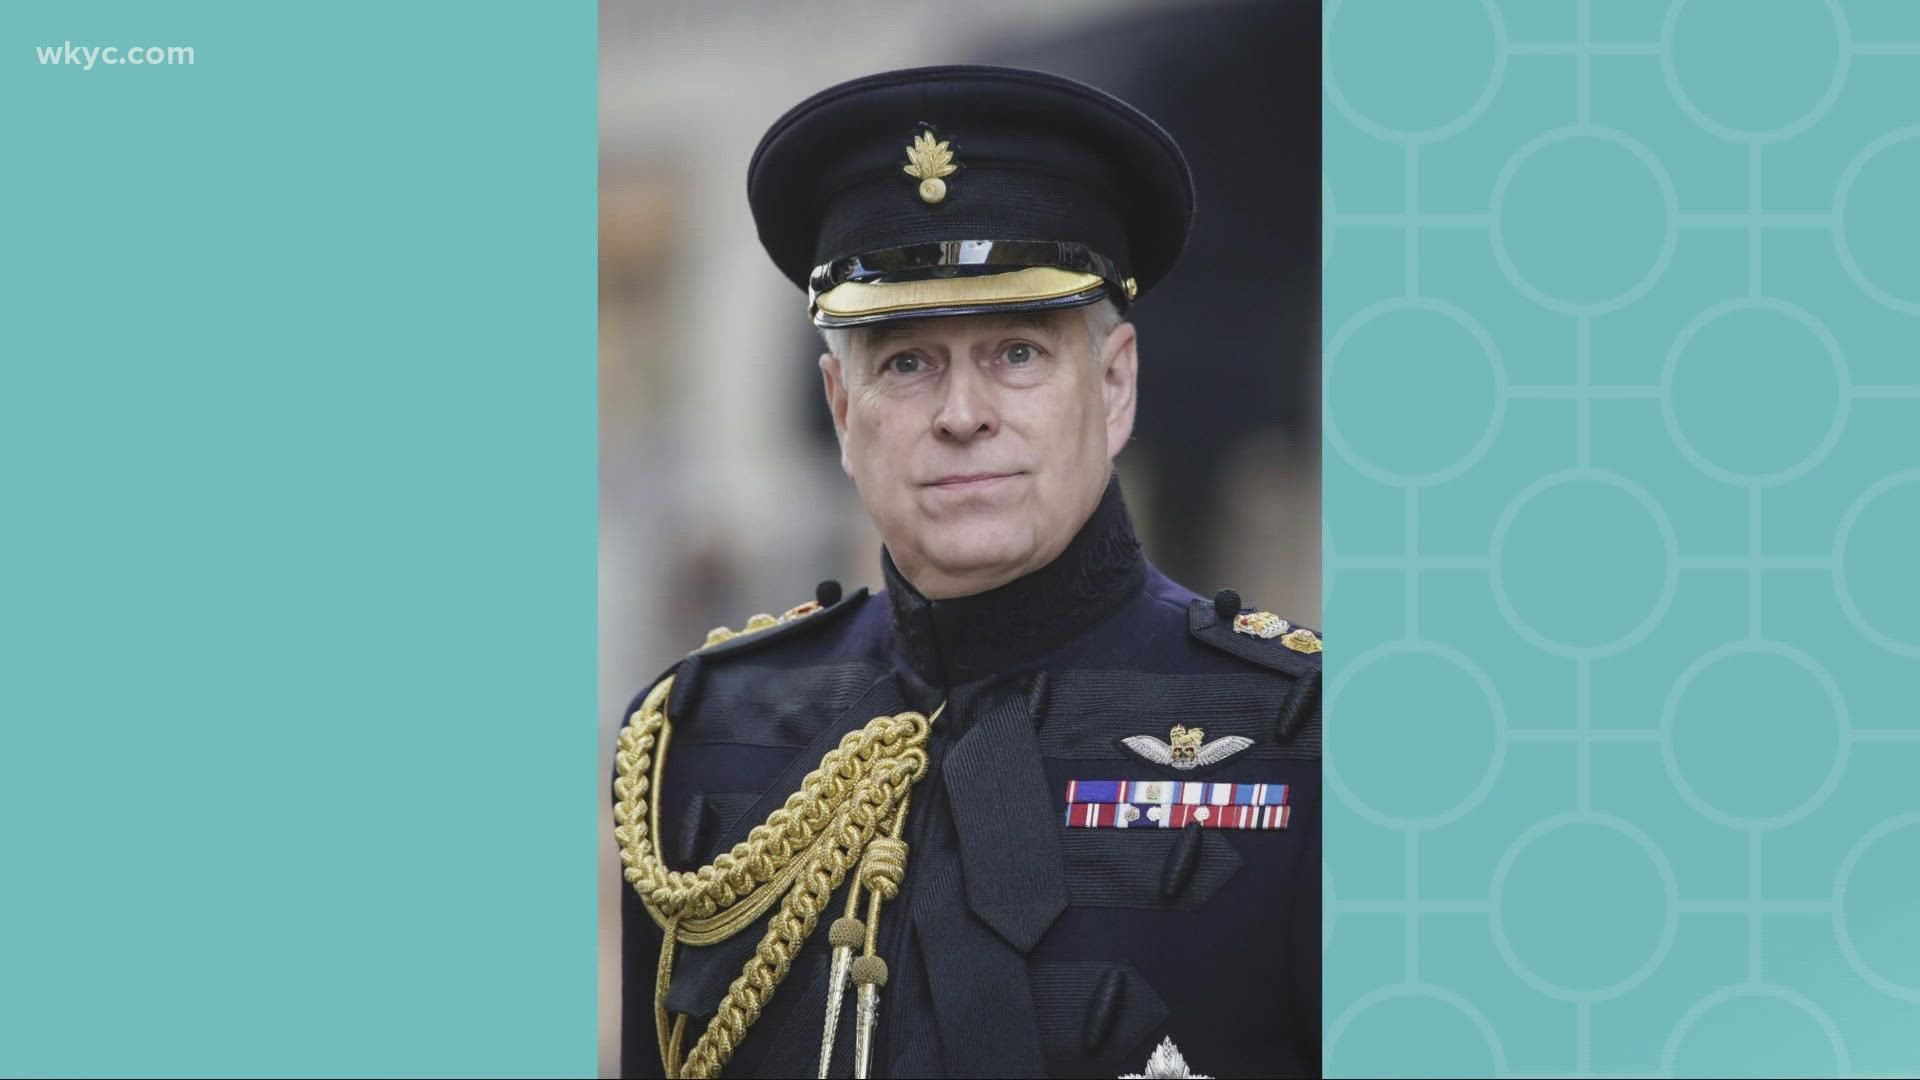 Prince Andrew, also known at the Duke of York, has been stripped of his military titles and charities.